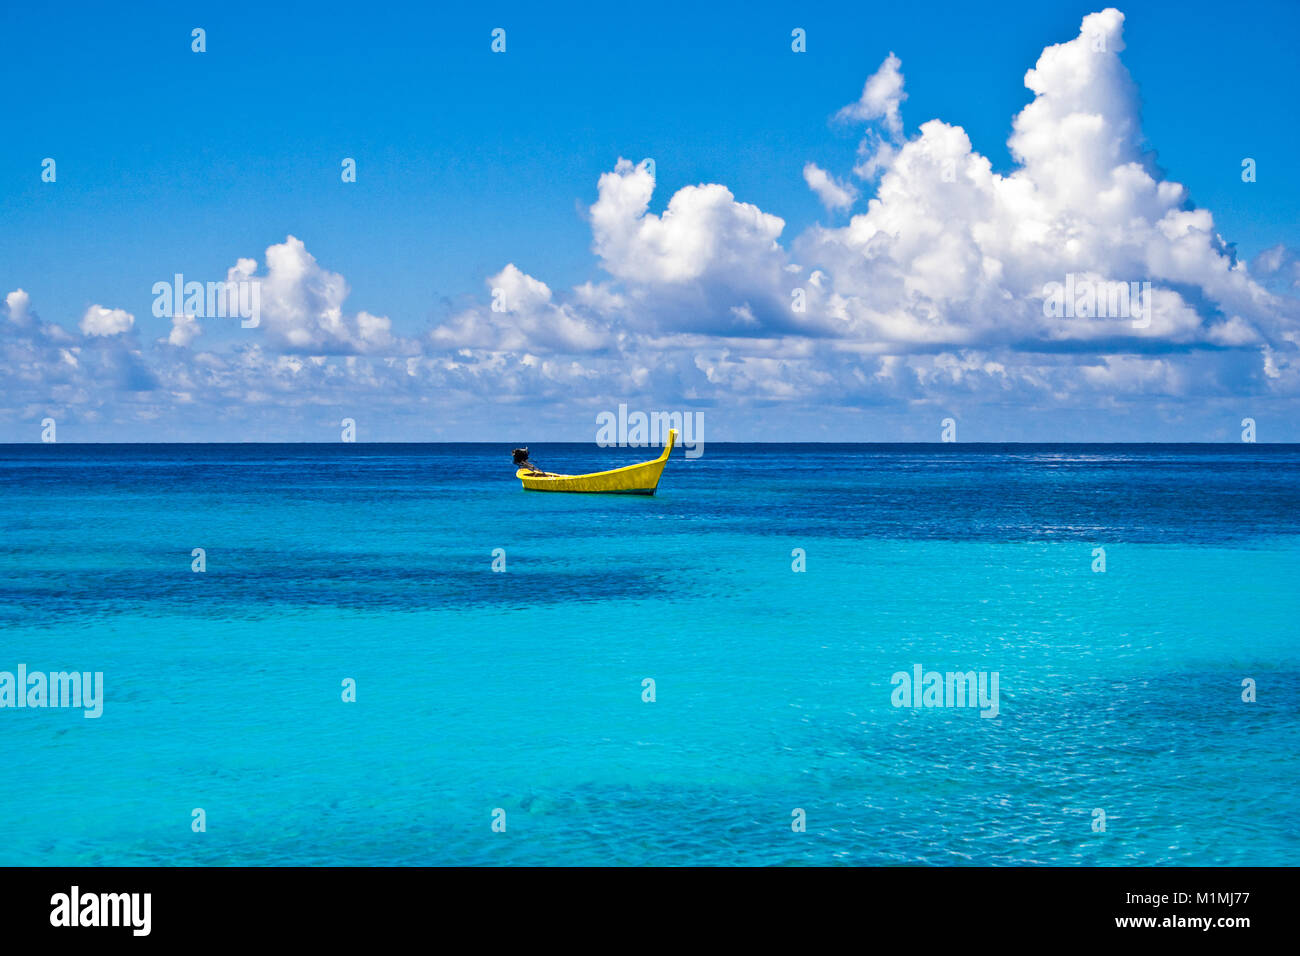 A distinctive yellow long-tail boat floating on the turquoise water at Ter Bay on Racha Island, Phuket, Thailand. Stock Photo